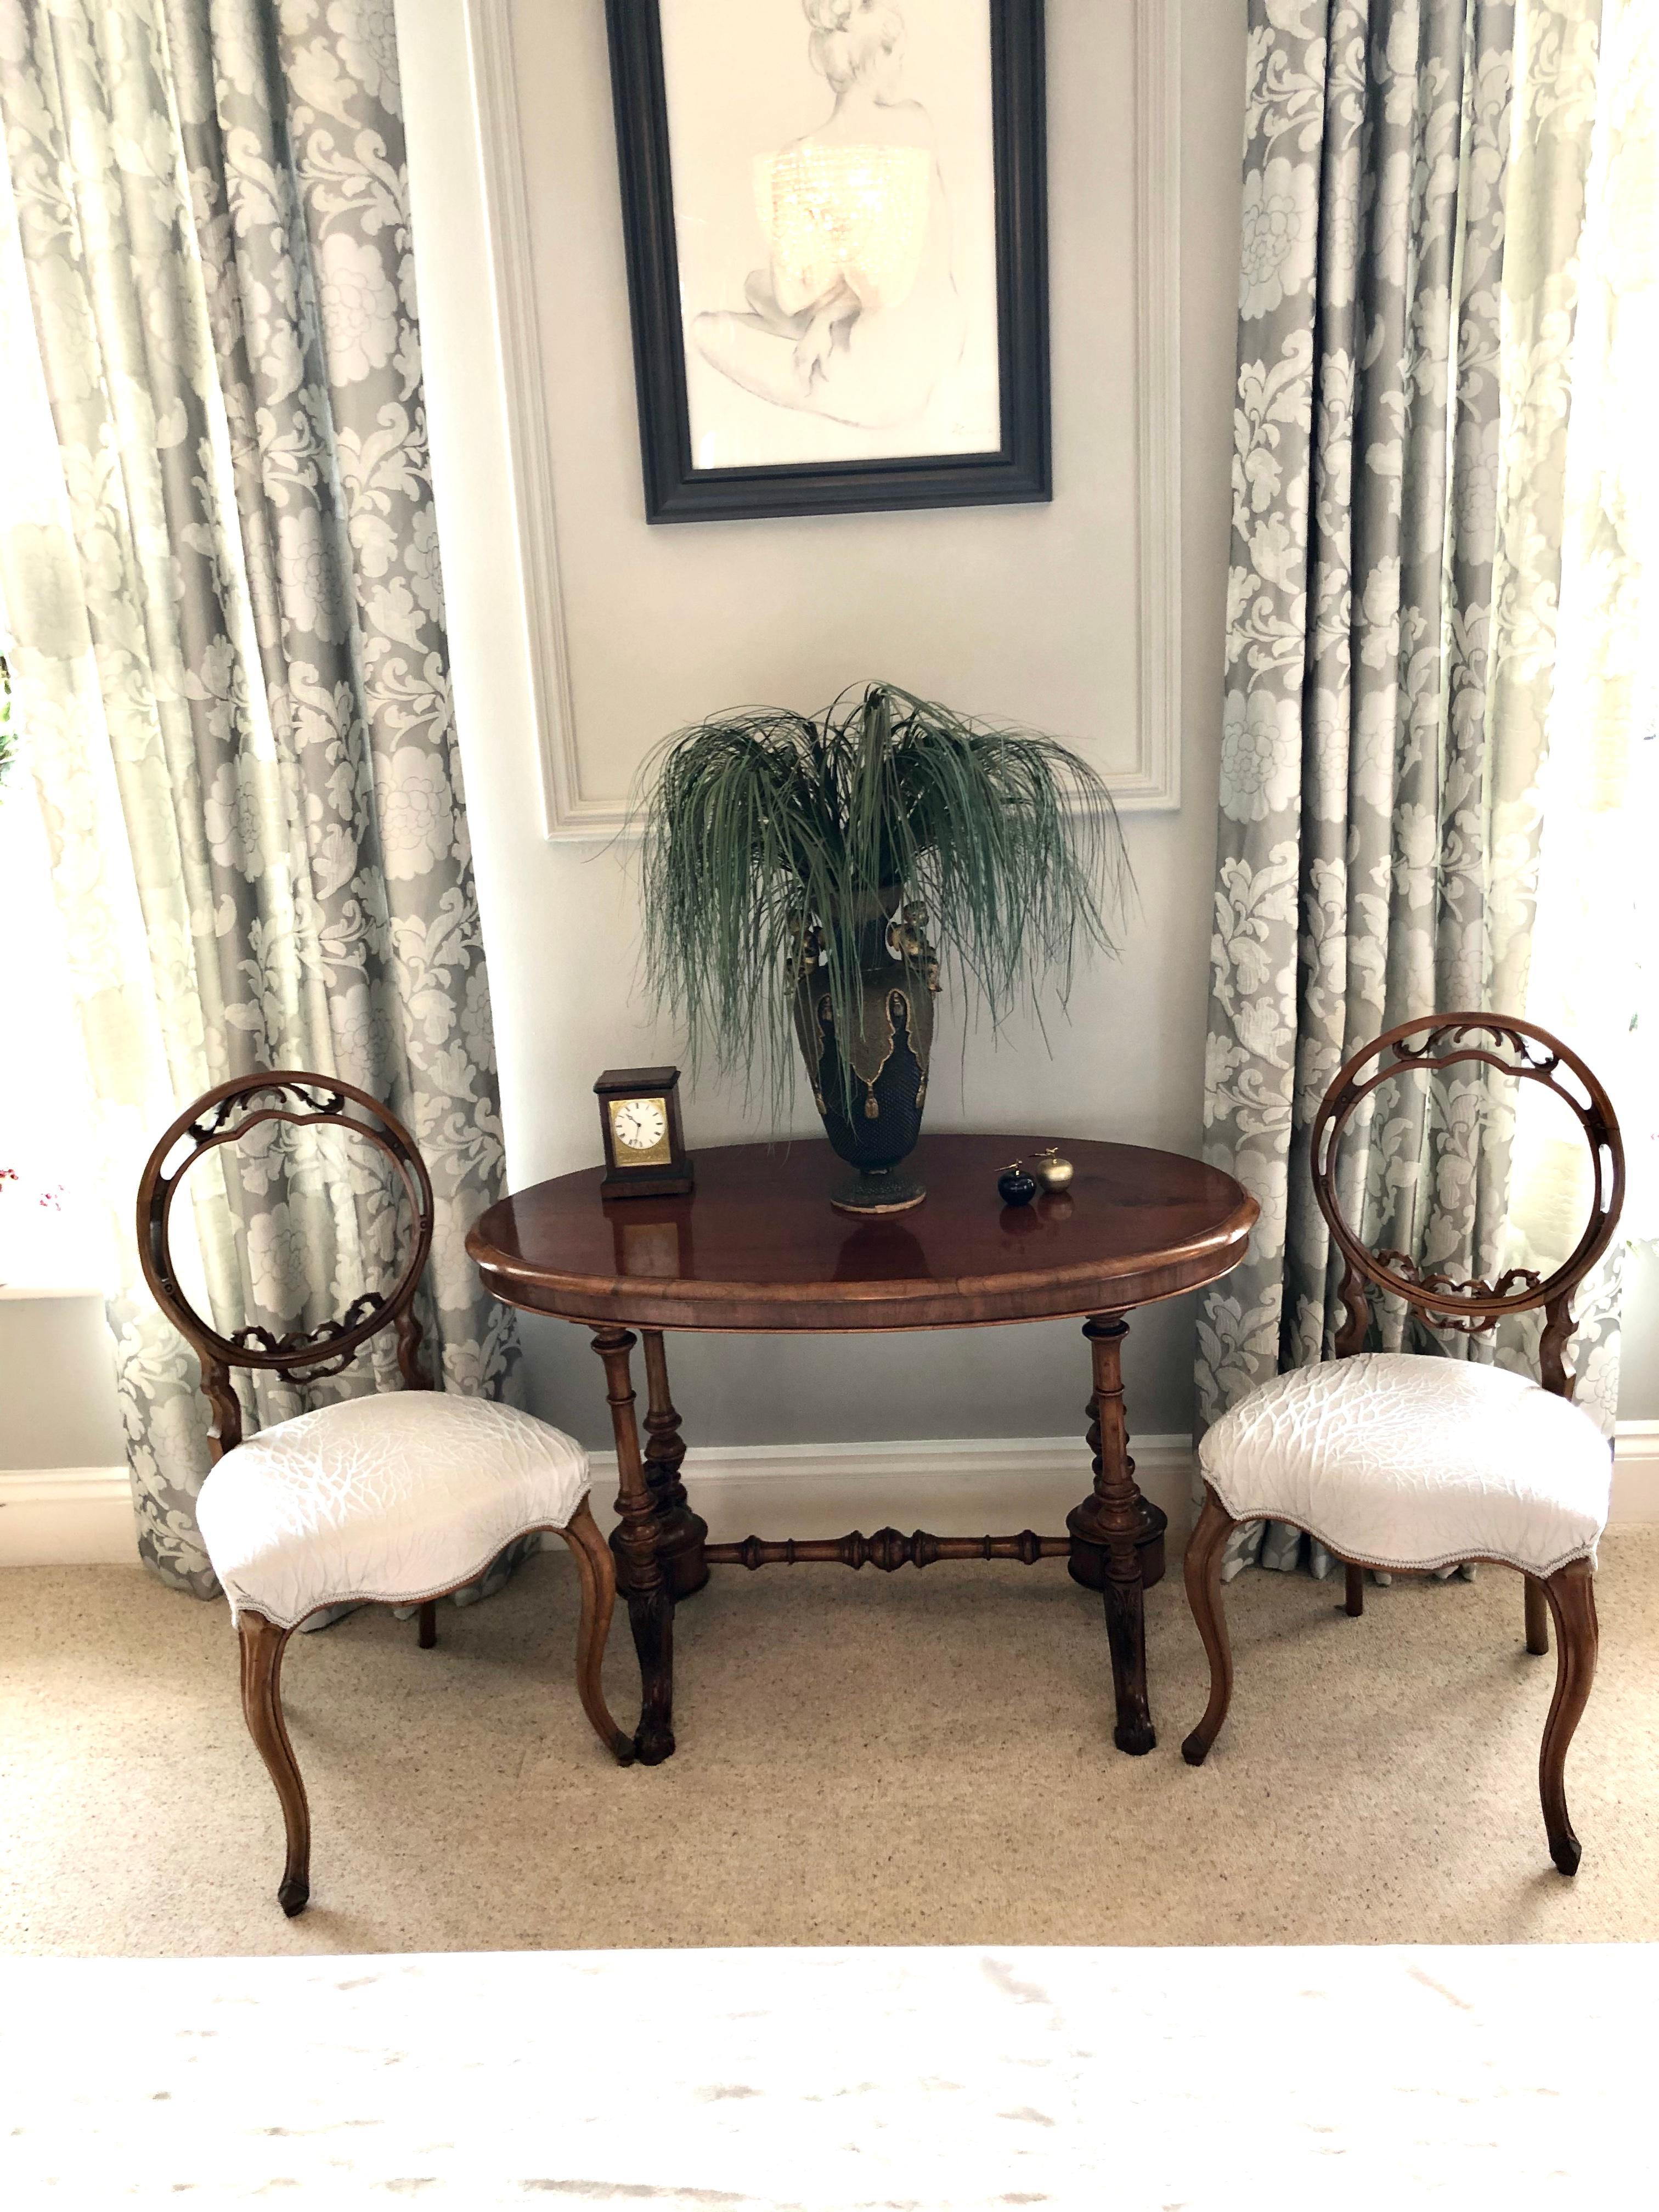 19th century Victorian antique oval walnut centre table having a splendid oval solid walnut top and an oval walnut frieze supported by four elegant turned and shaped columns with two turned shaped finials. It is raised on four shaped carved cabriole